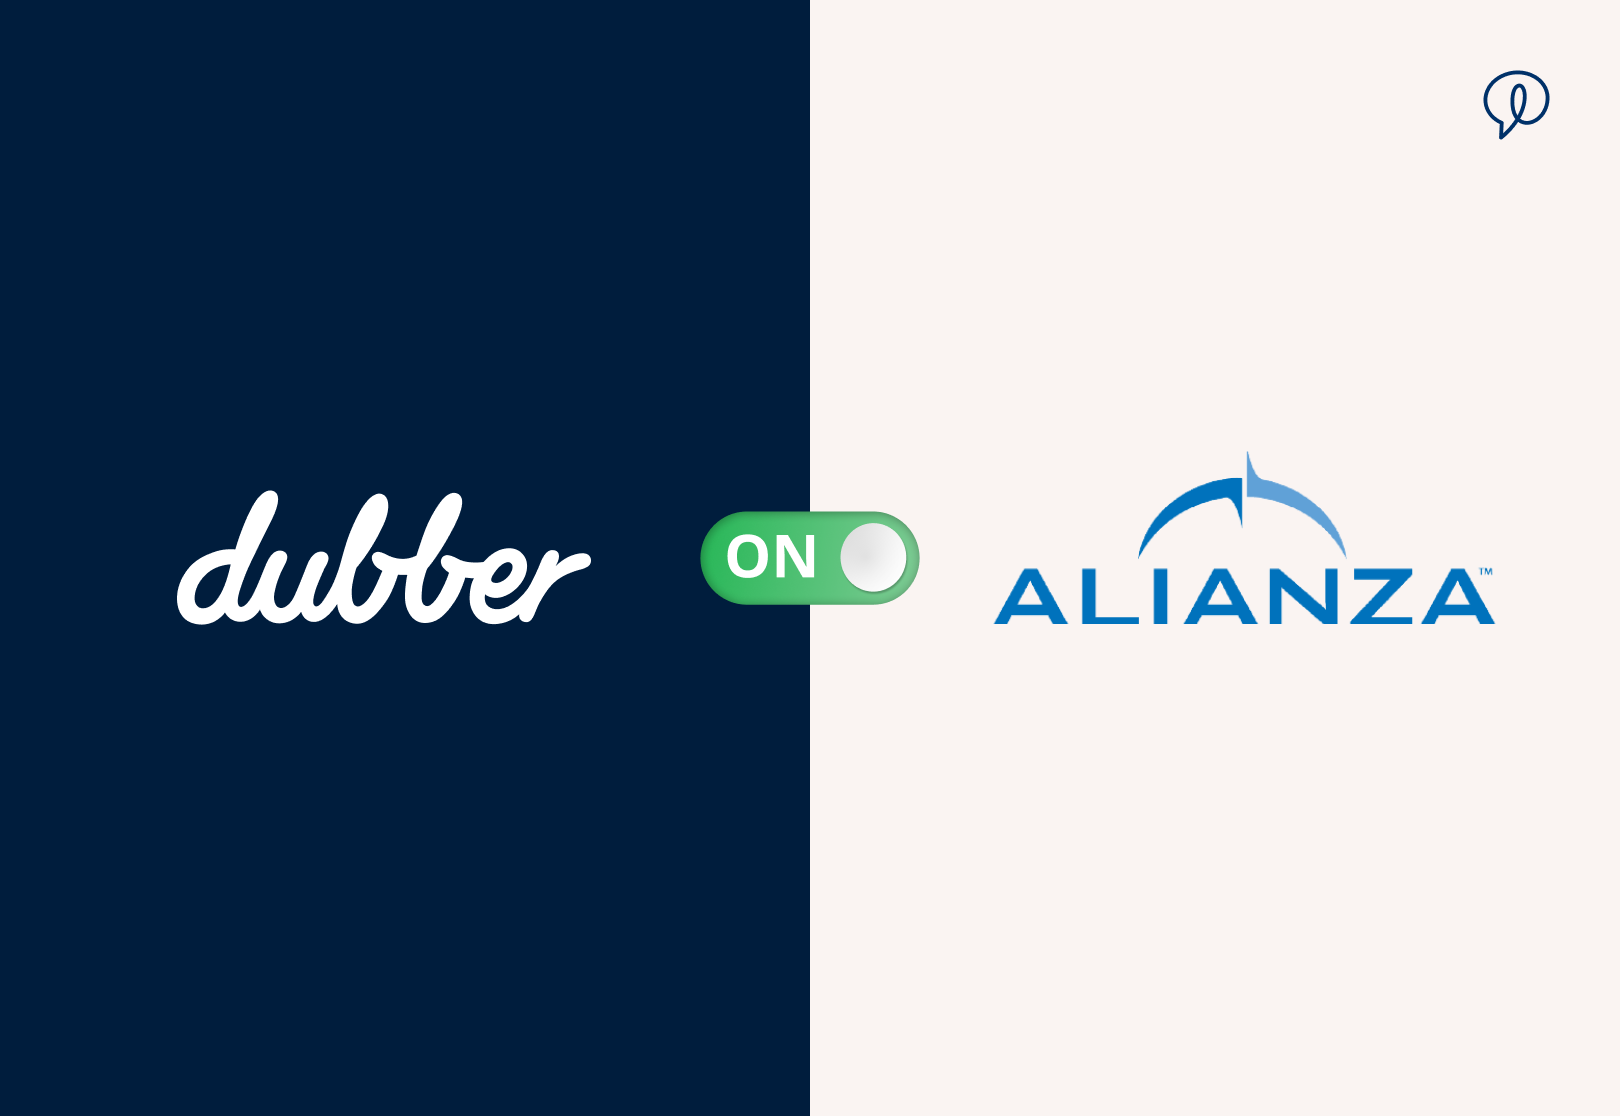 Dubber and Alianza Collaborate to Elevate Cloud Communications for CSPs Worldwide